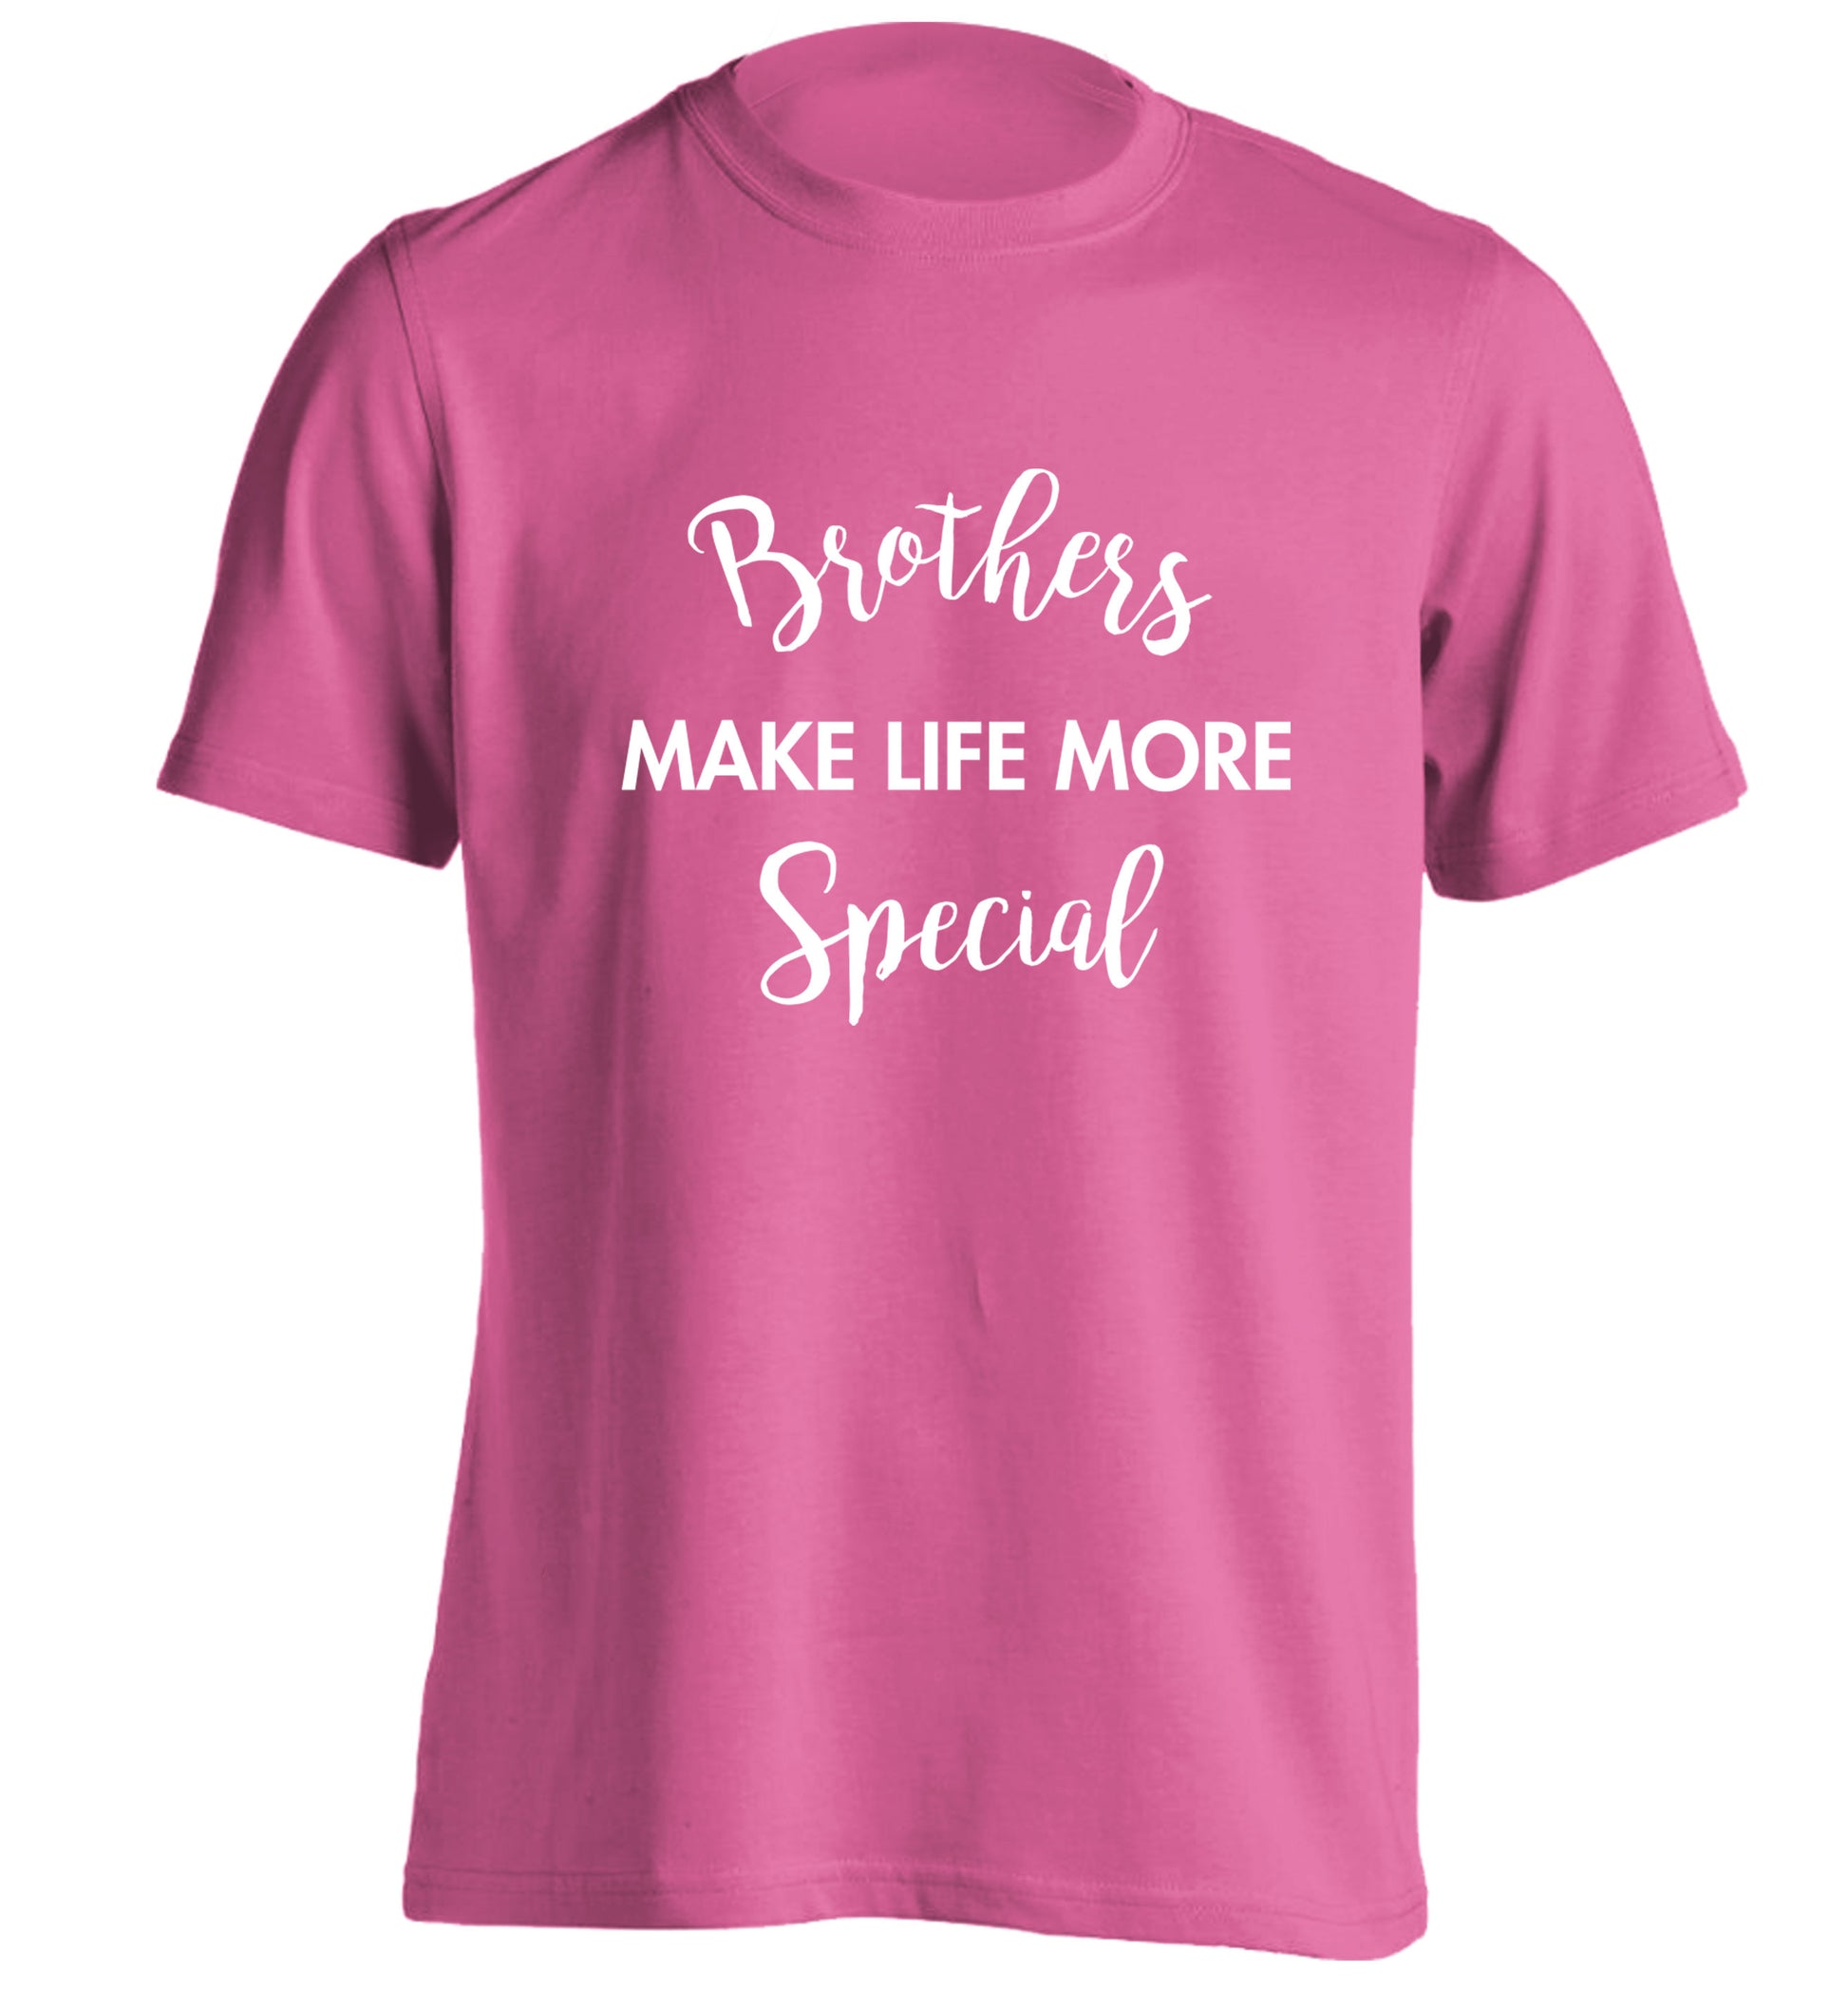 Brothers make life more special adults unisex pink Tshirt 2XL